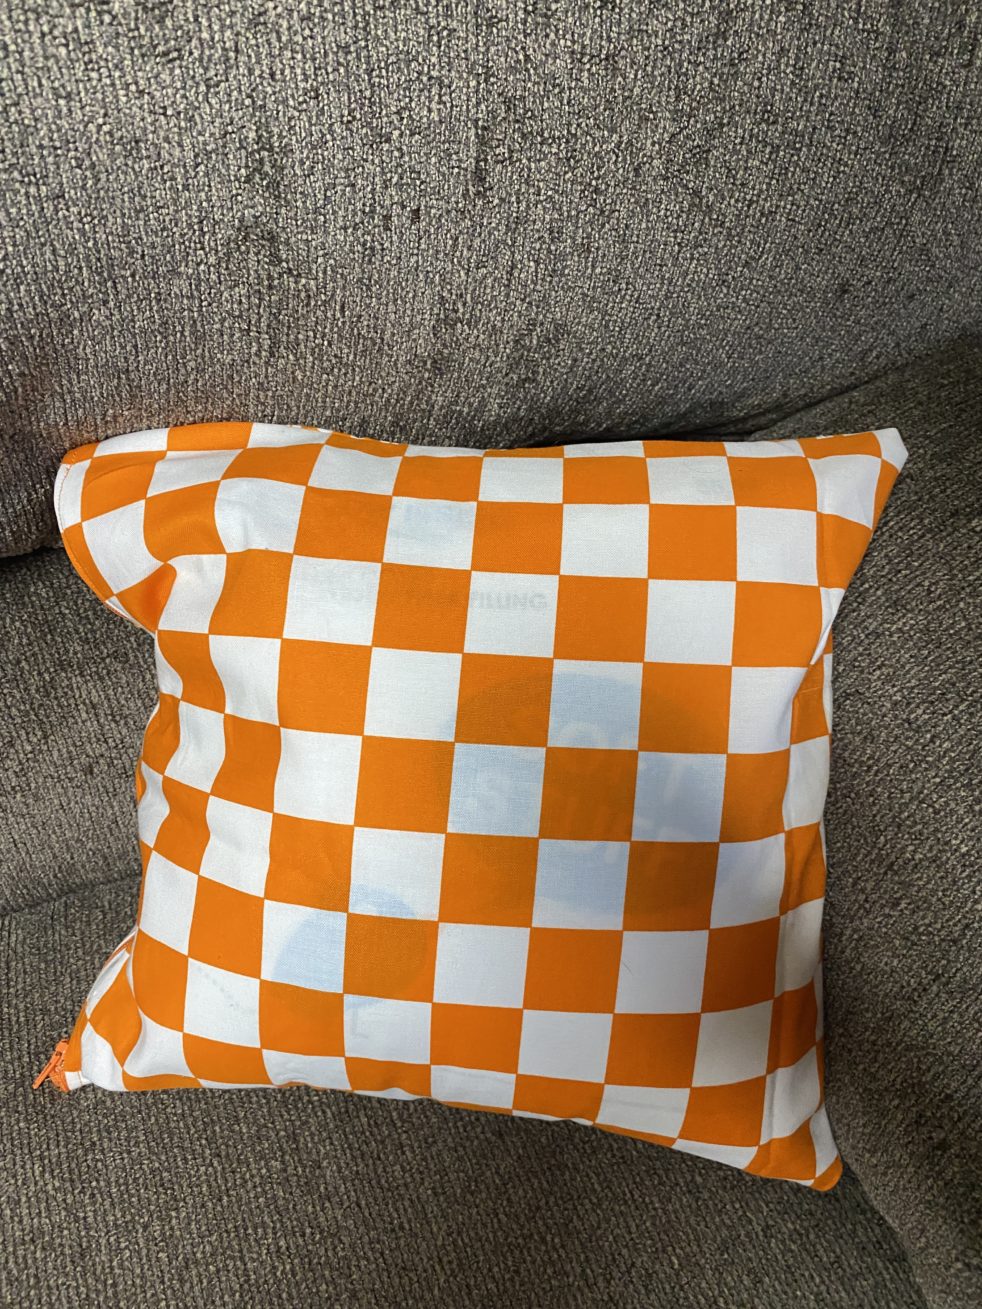 Orange and White Checkerboard Decorative Pillow - This is great for anyone who is a Vols fan or likes the color orange. #Orange #Vols #VFL